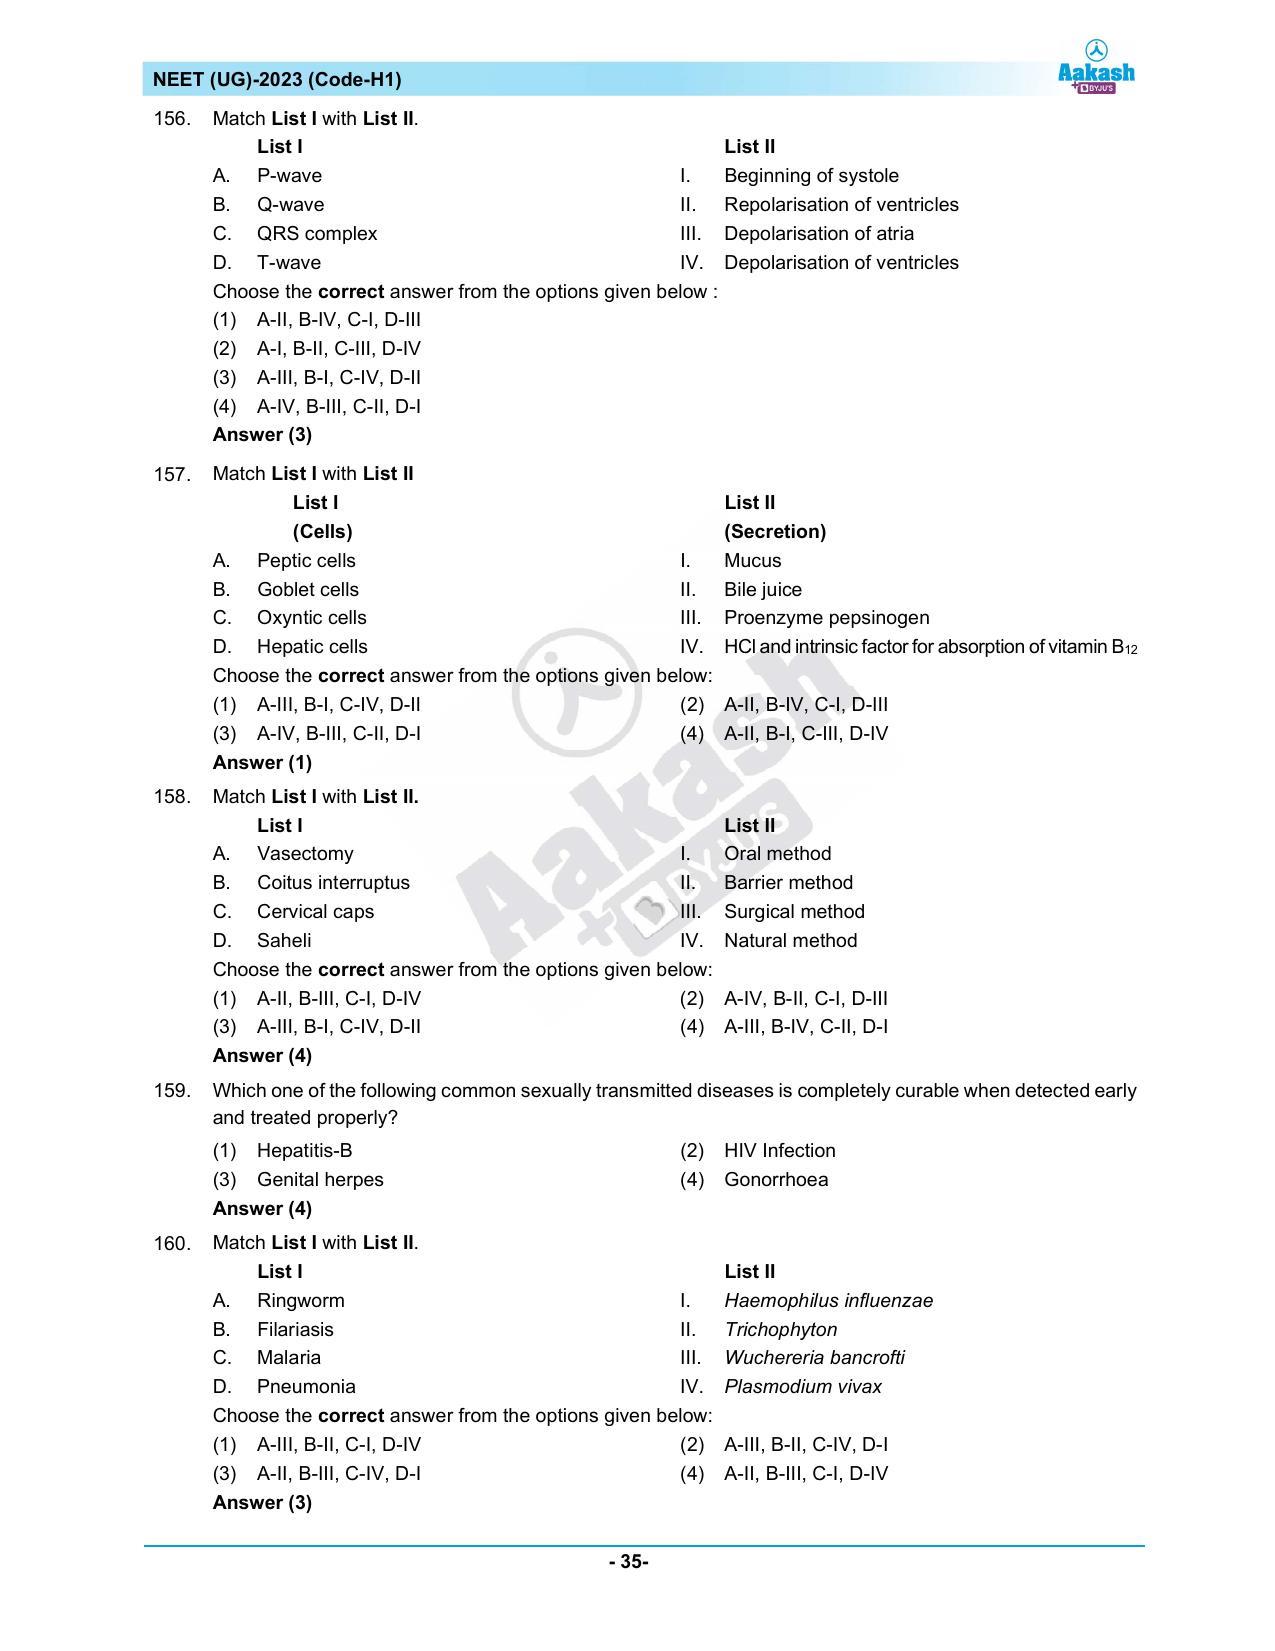 NEET 2023 Question Paper H1 - Page 35